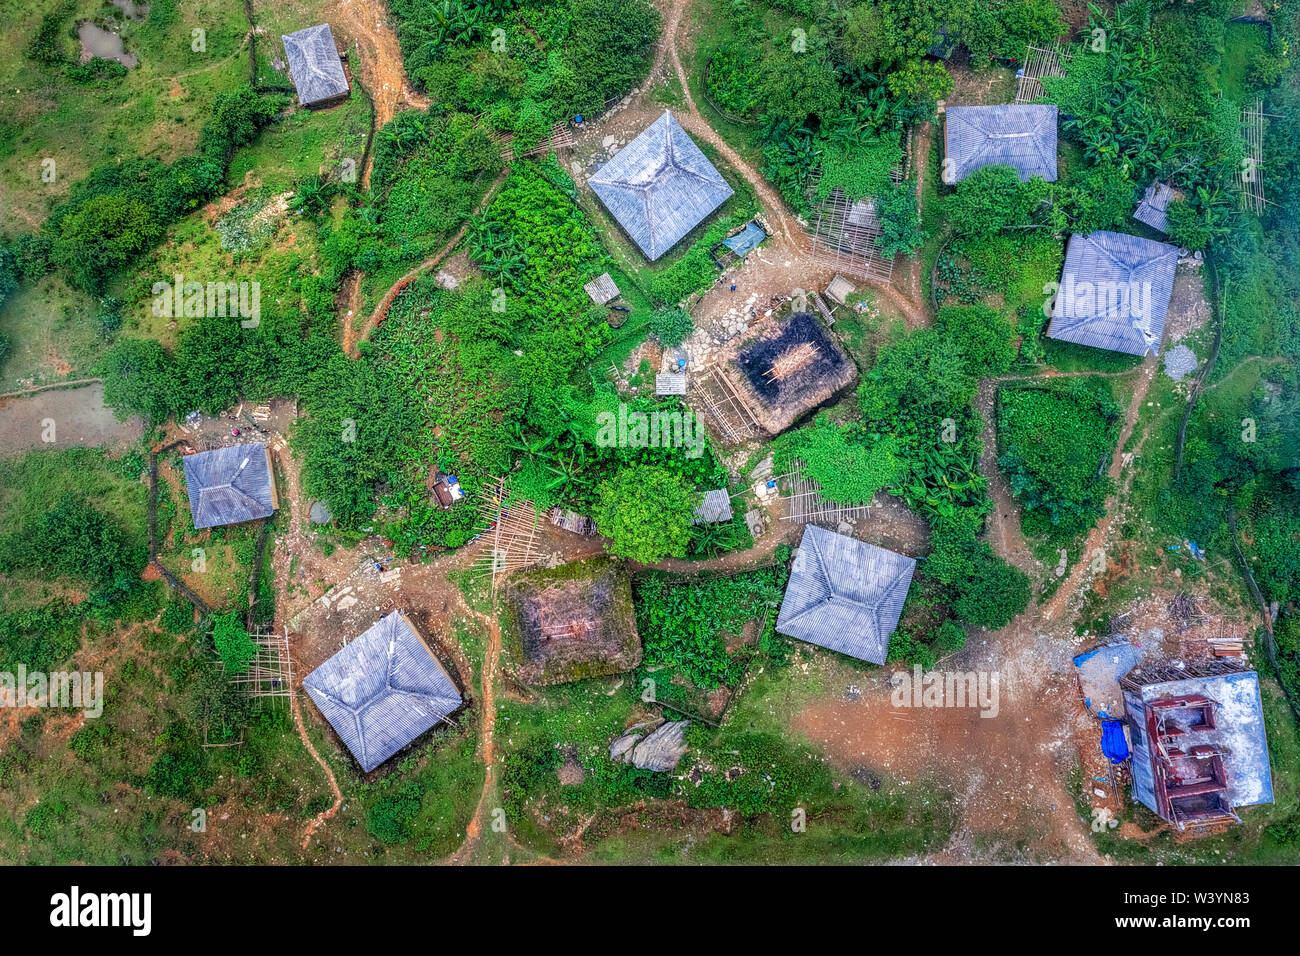 Aerial view of Trinh Tuong house or house made of land of ethnic minorities in Y Ty, Lao Cai, Vietnam. This is the traditional house of Ha Nhi people. Stock Photo